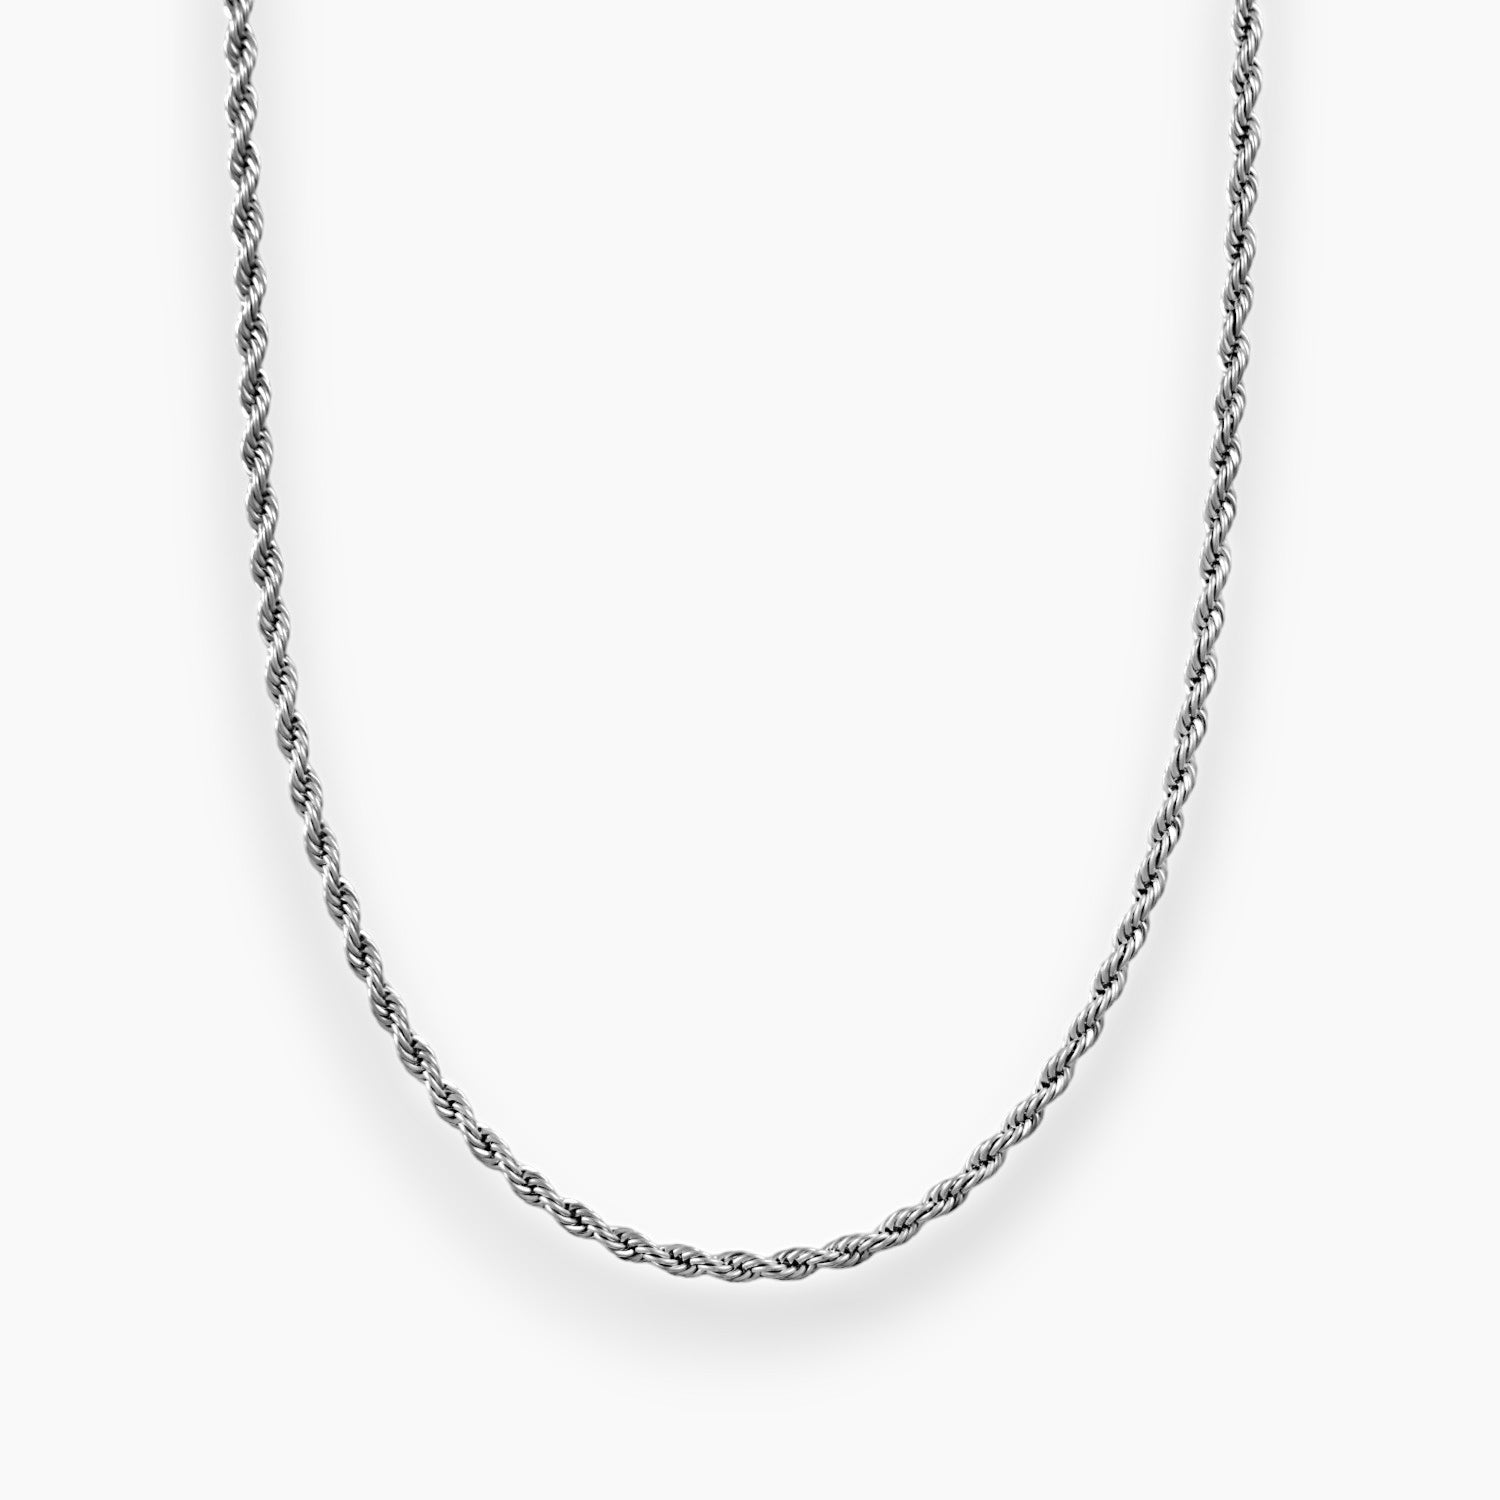 3mm silver rope chain